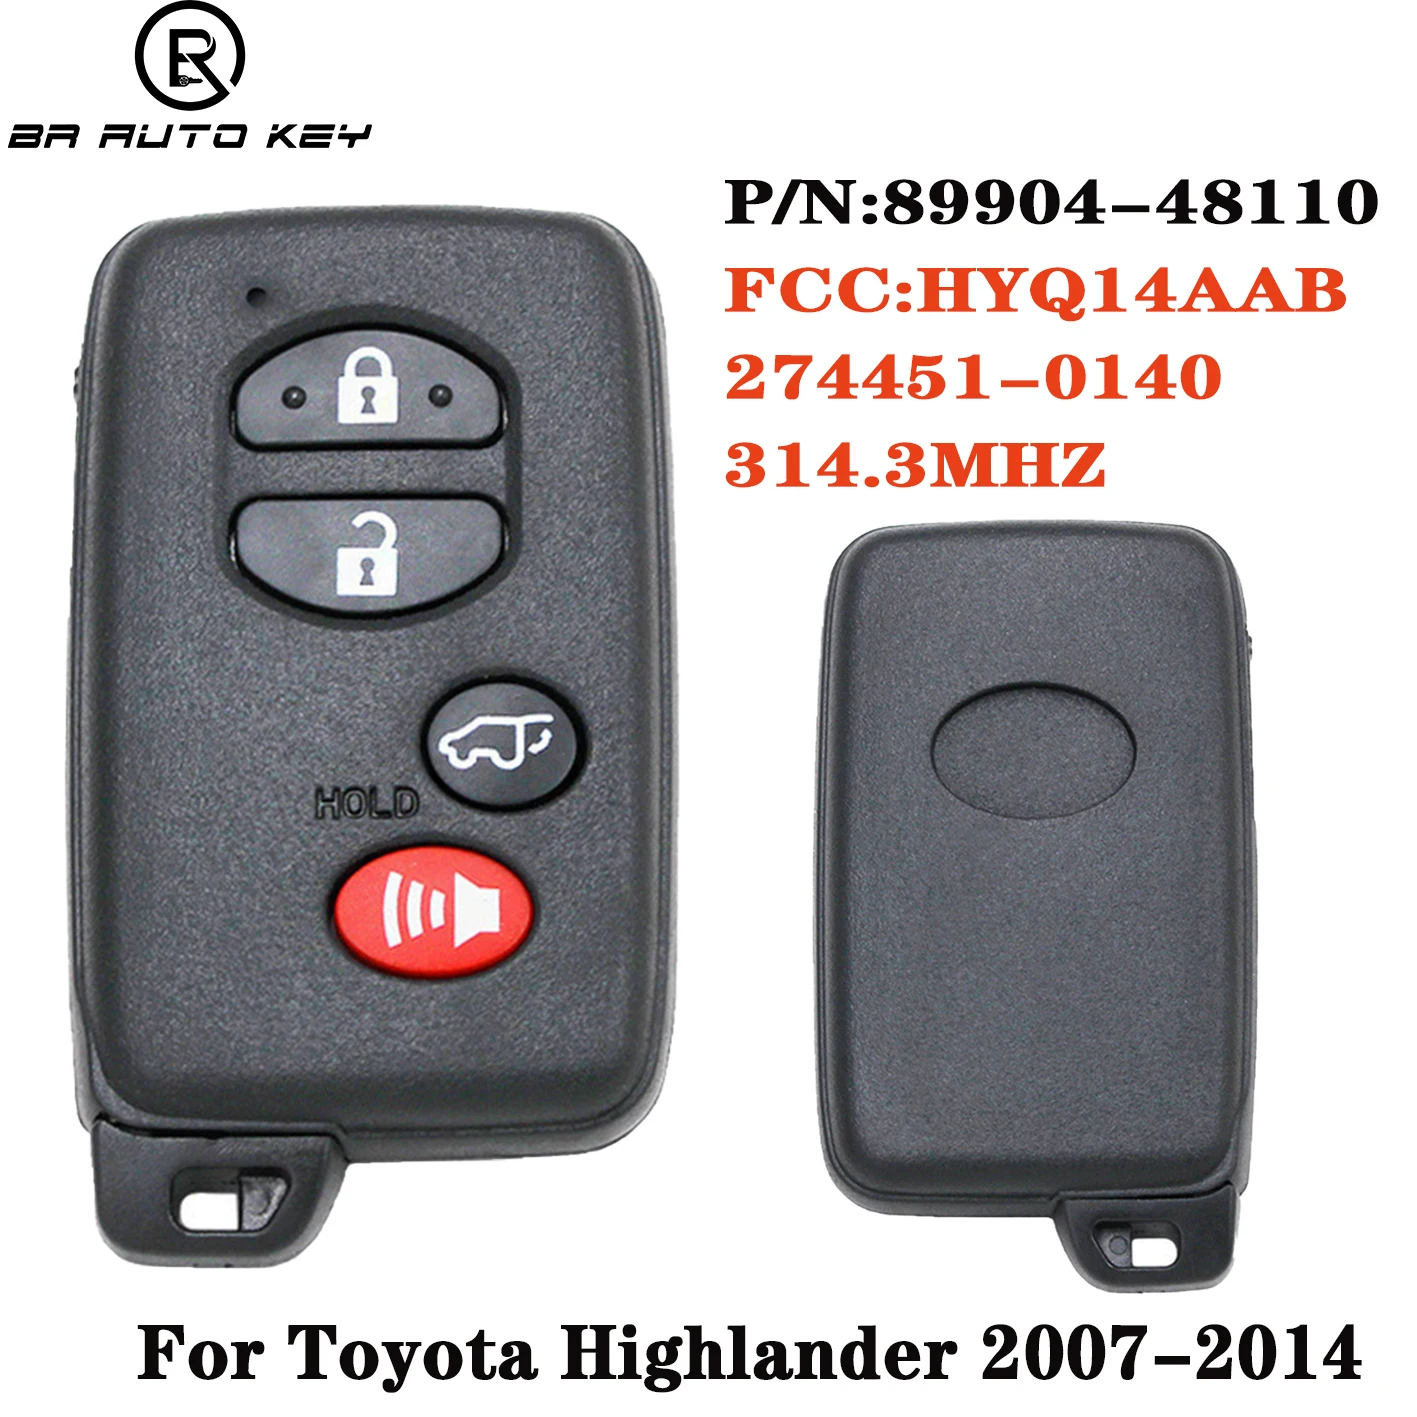 89904-48110 4 Buttons Smart Remote Key Fob For Toyota Highlander Keyless-go 2007-2014 314.3Mhz 4D Chip FCC:HYQ14AAB 271451-0140